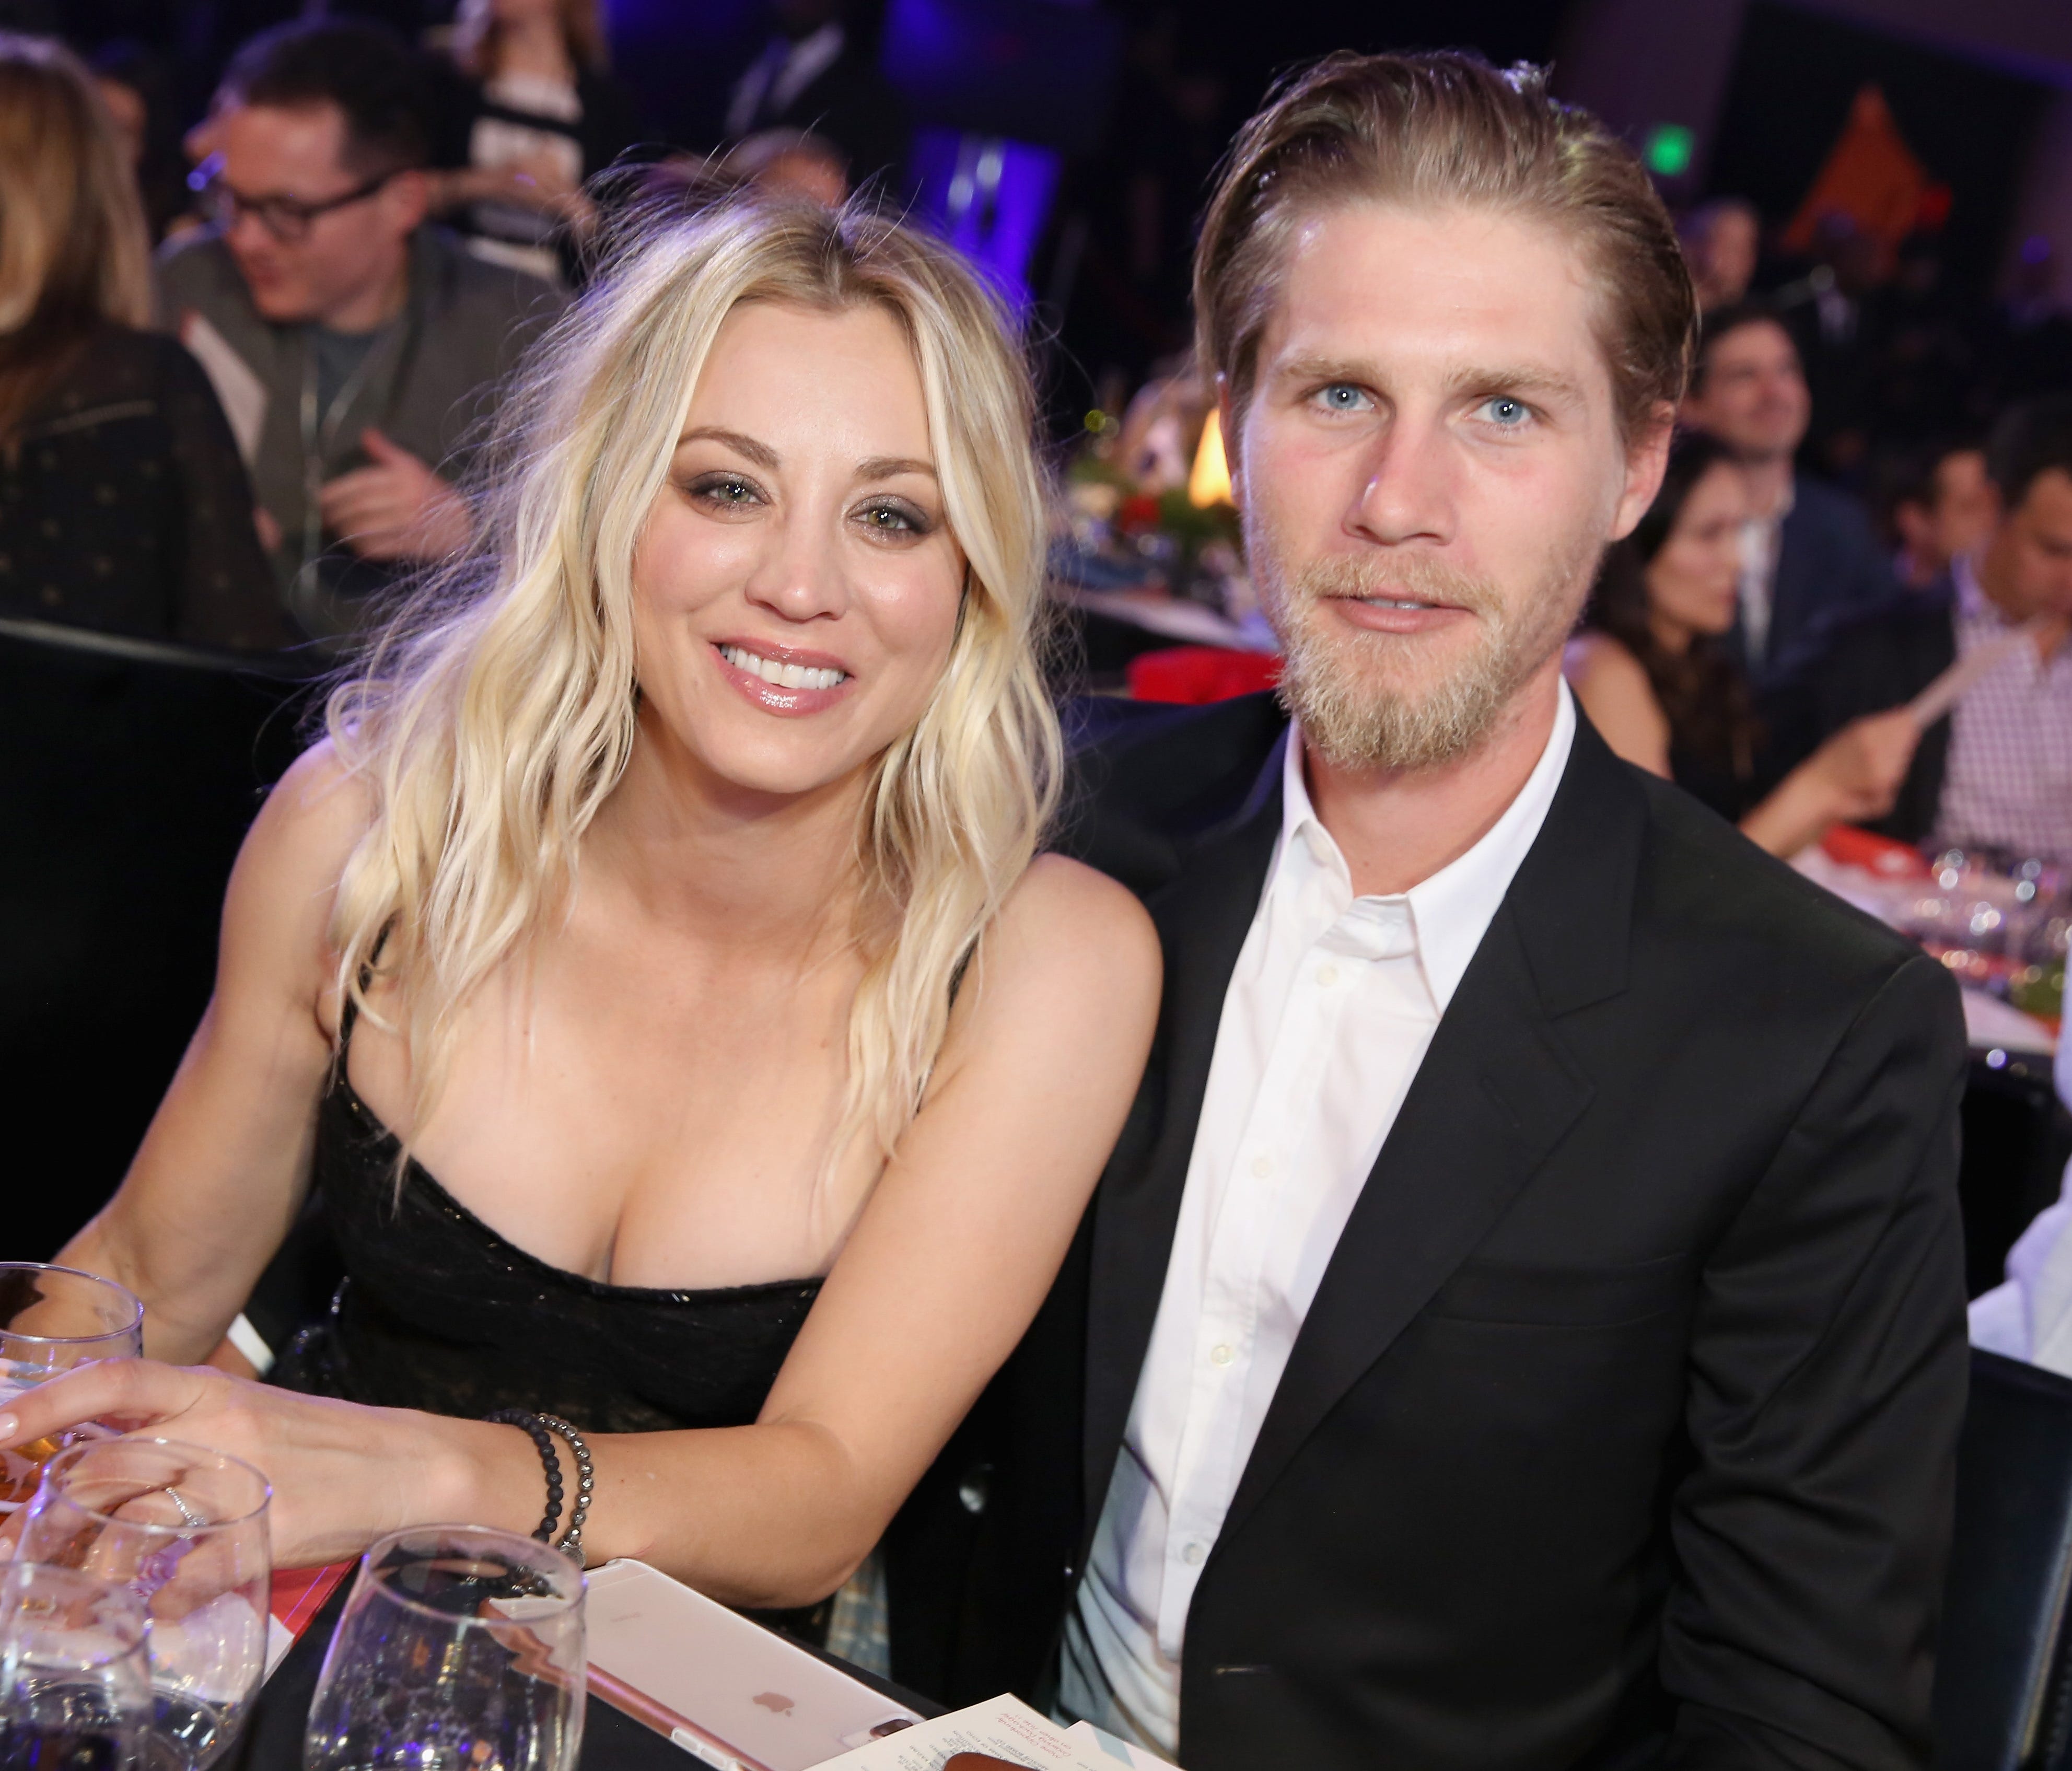 Kaley Cuoco and Karl Cook, pictured here in March, got married on June 30.